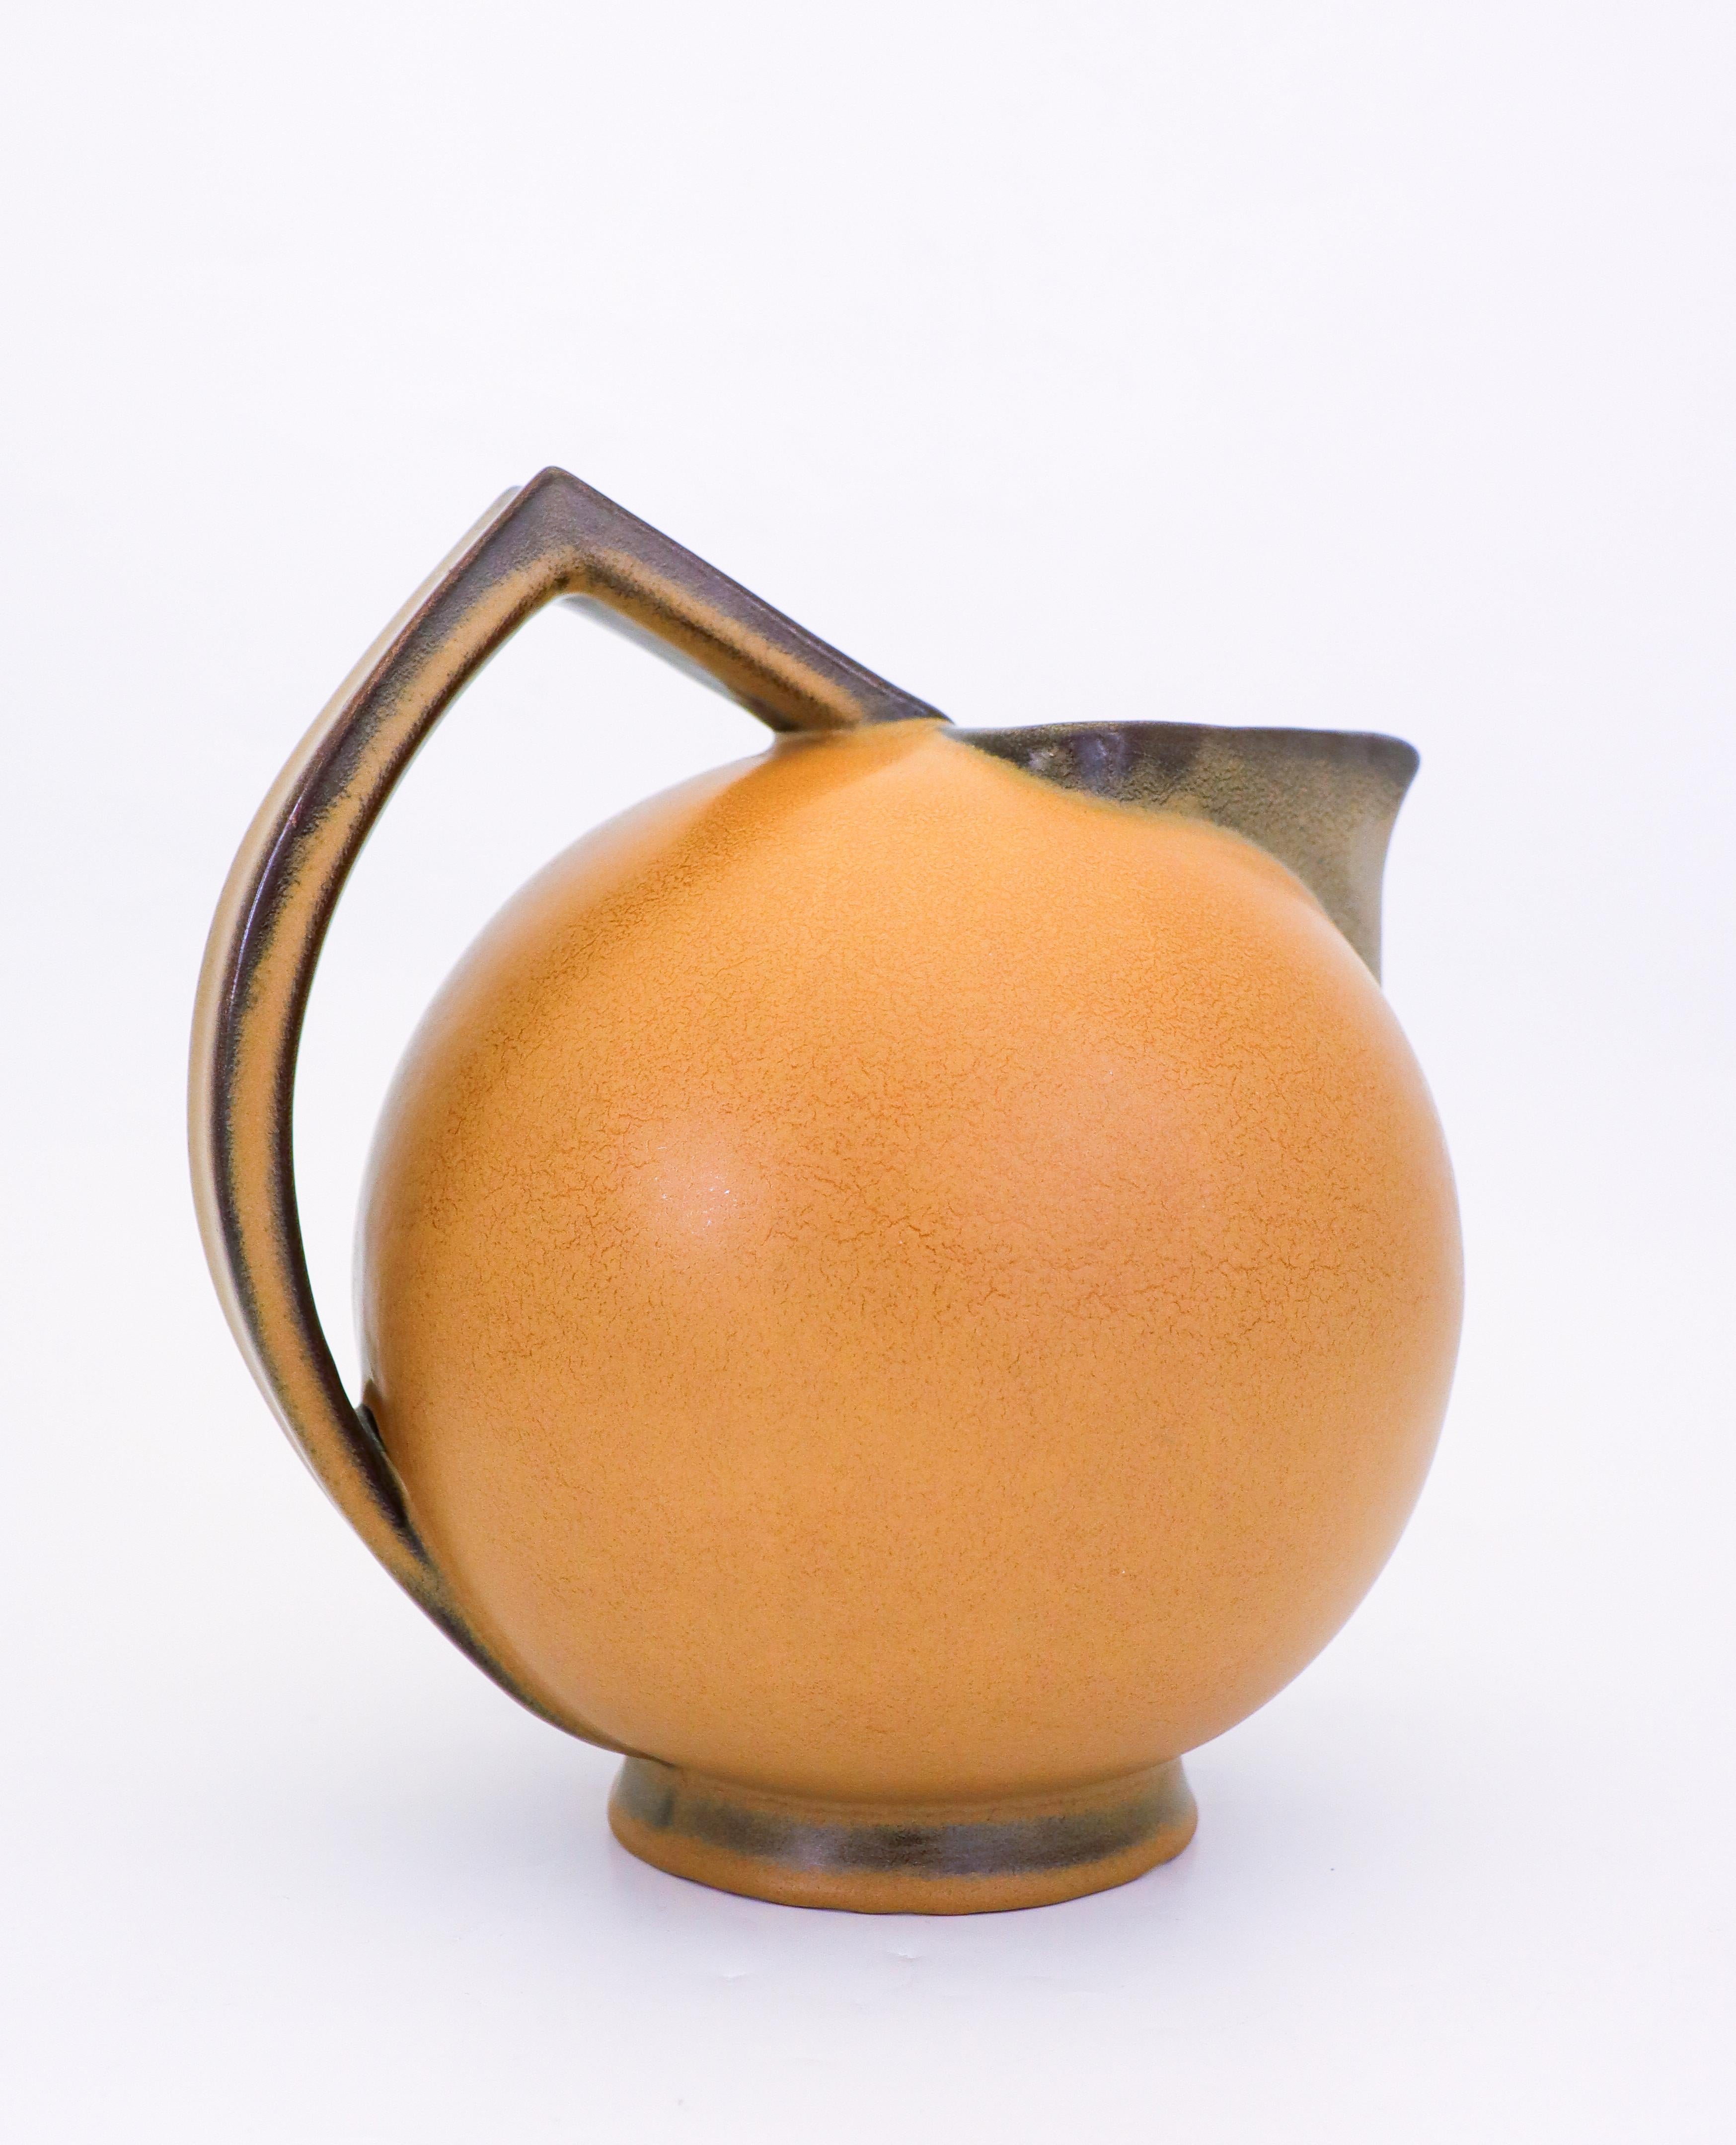 A lovely pitcher designed by Ewald Dahlskog in the 1930s at Bo Fajans in Gefle, Sweden. It is 26.5 cm high and in very good condition.

Ewald Dahlskog, born in 1880, was a pioneering Swedish designer and furniture designer. His works are